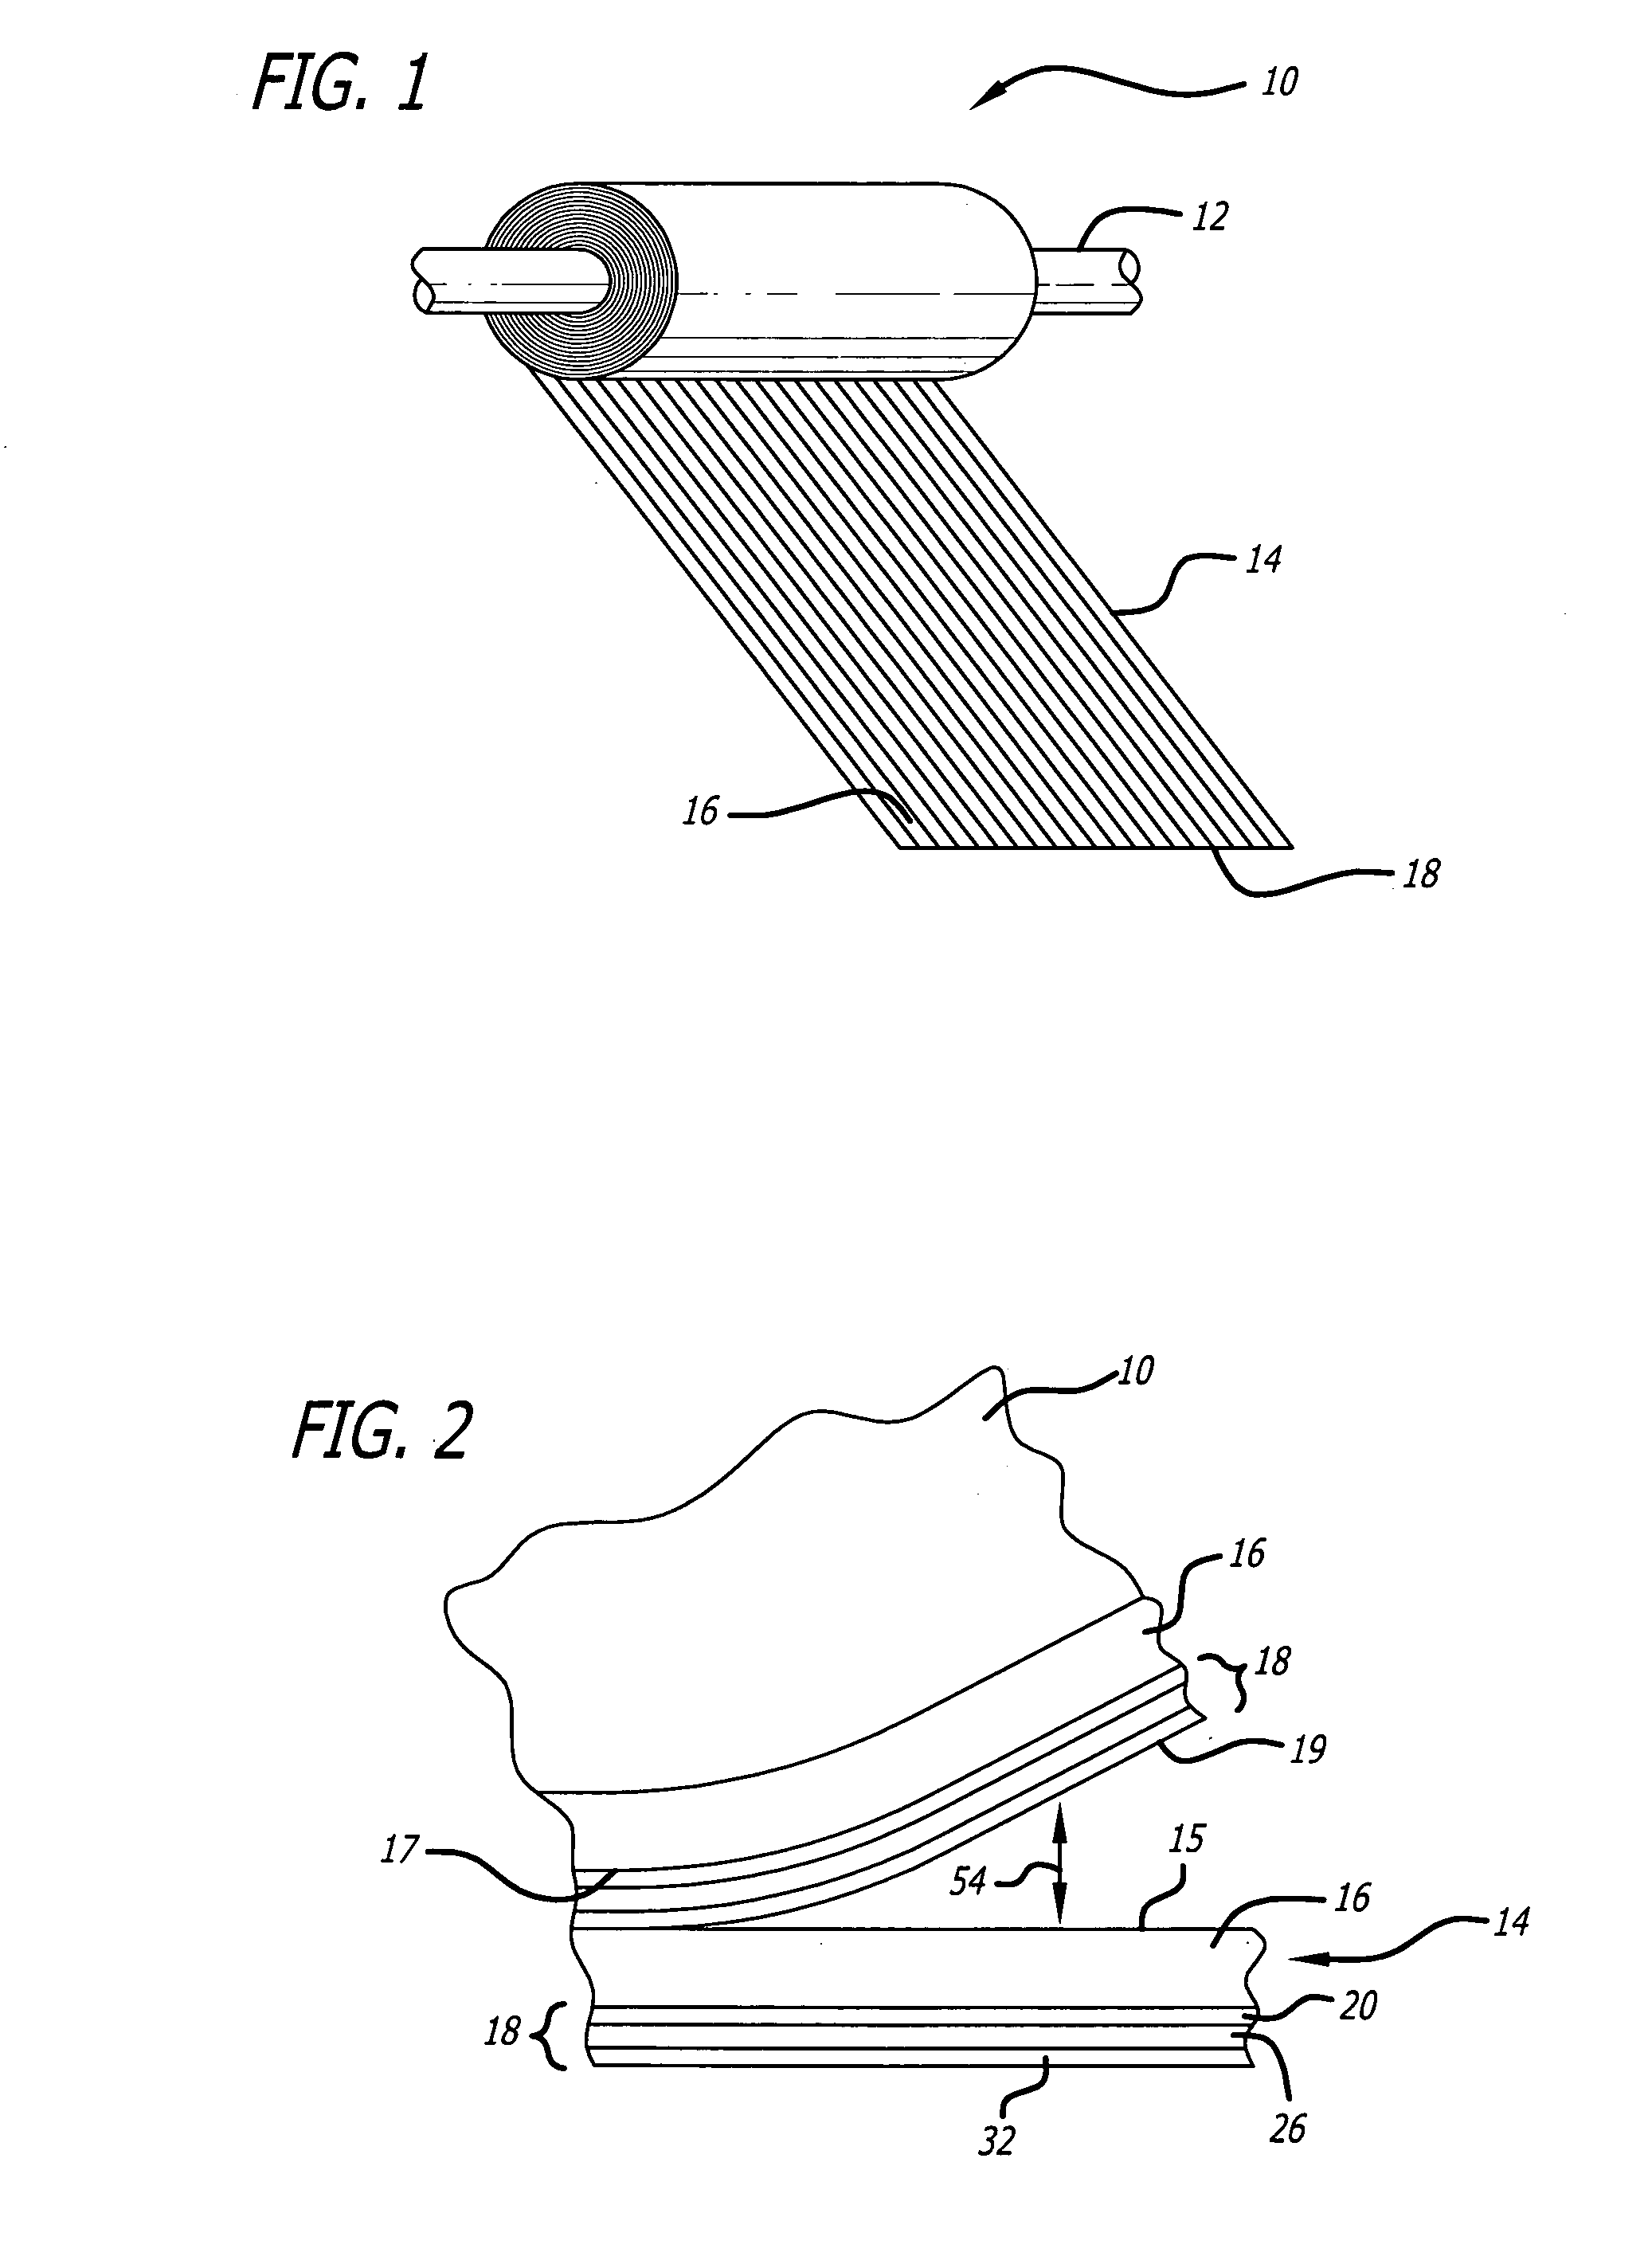 Composite Tape For Use In Tape Laying Machines